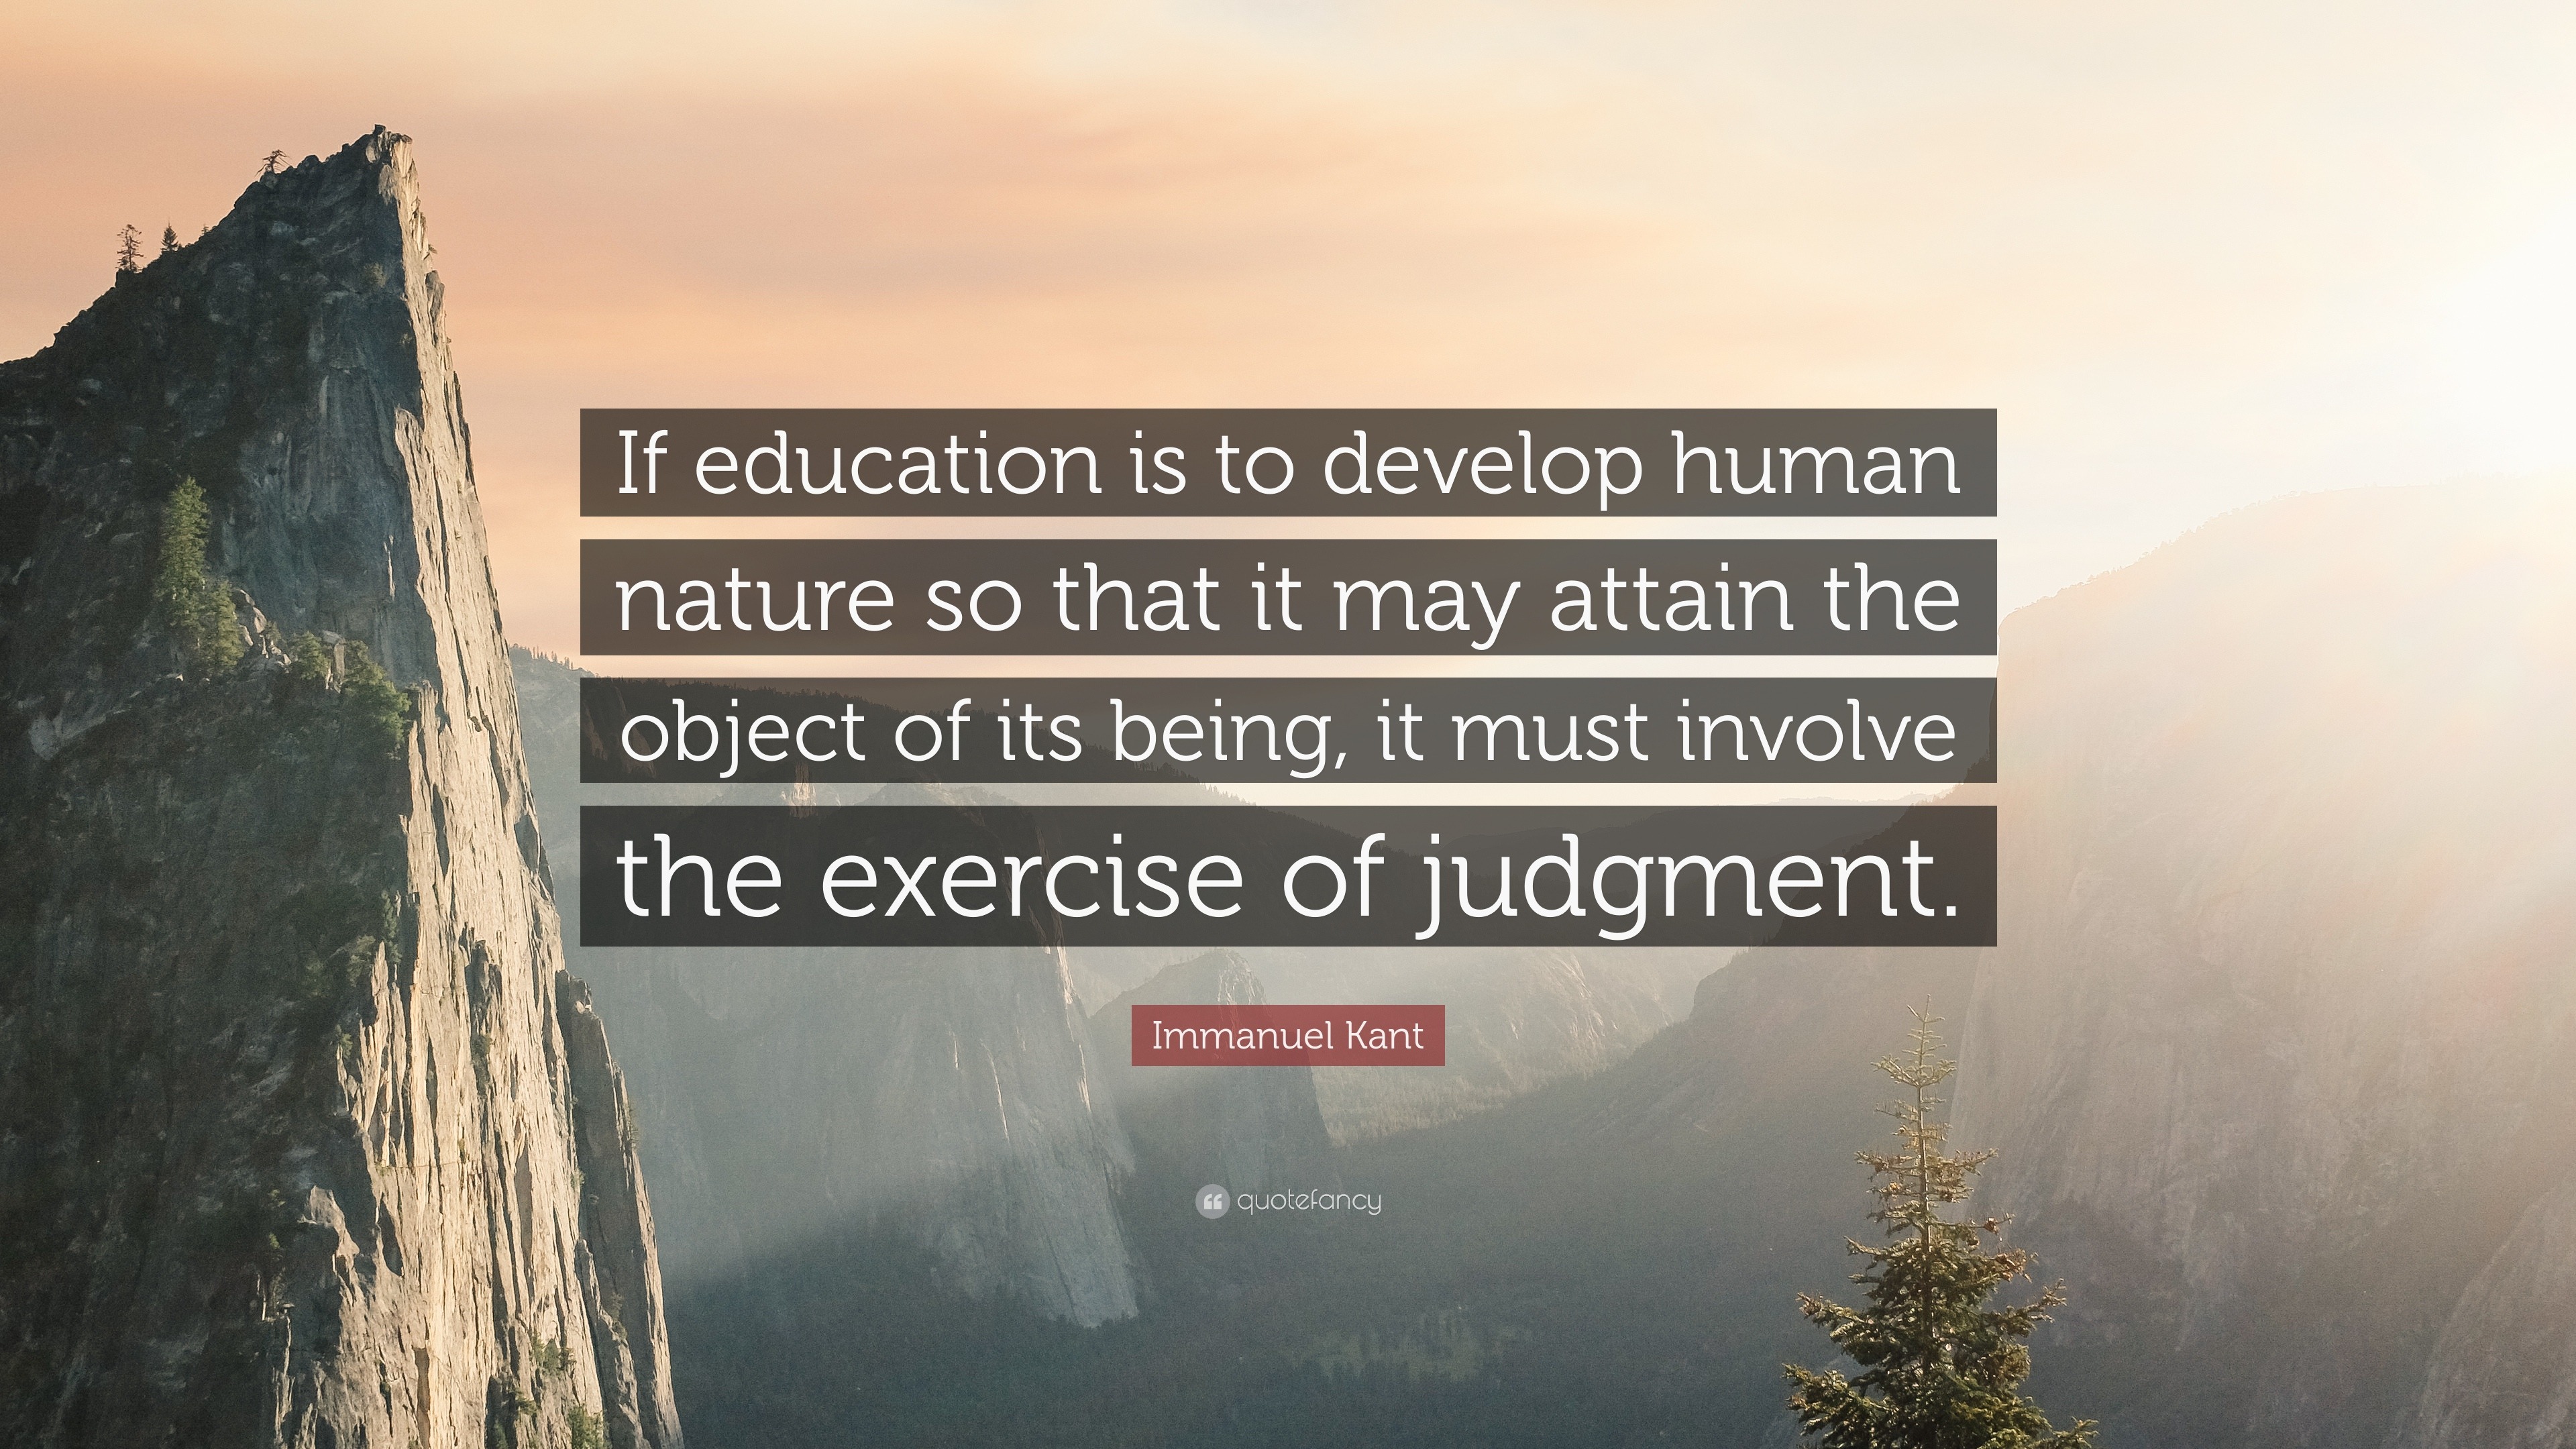 Lighed Bukser morgue Immanuel Kant Quote: “If education is to develop human nature so that it  may attain the object of its being, it must involve the exercise of j...”